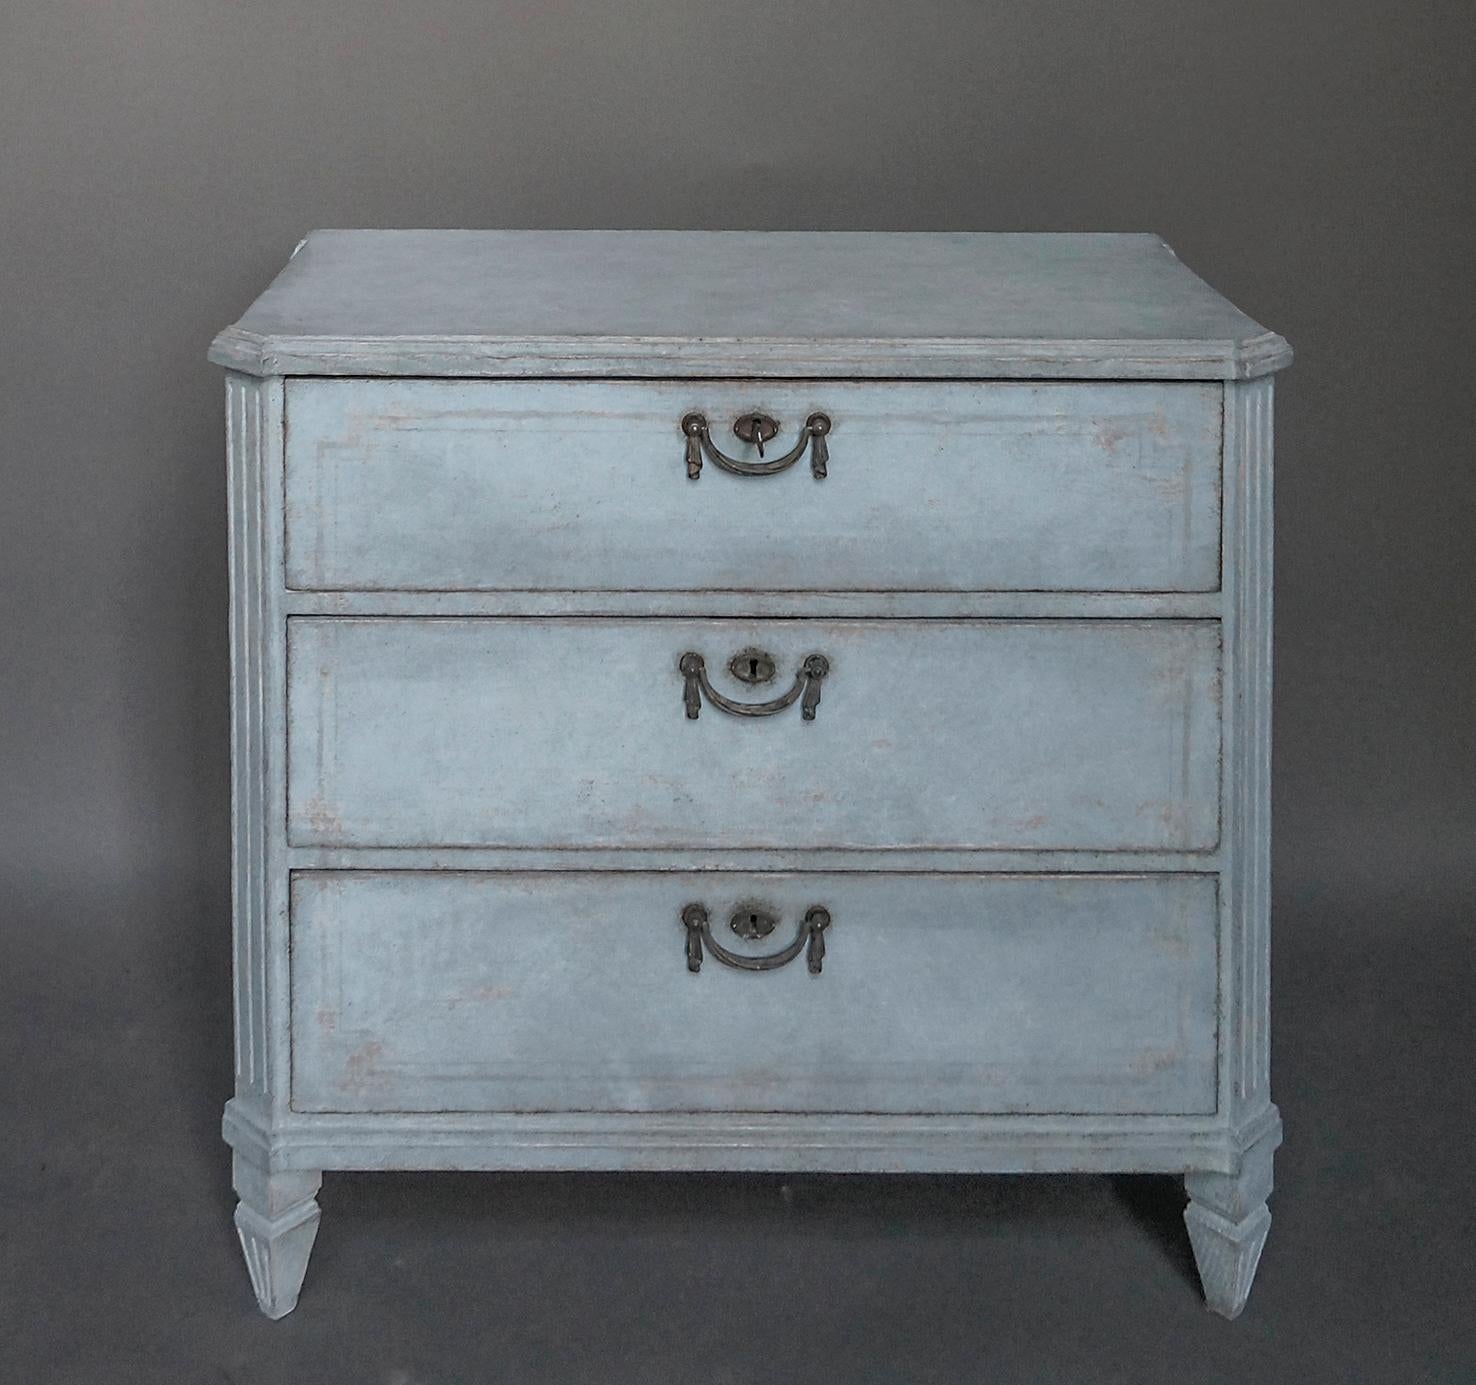 Nice little three-drawer commode in soft blue paint, Sweden, circa 1880. Shaped top with canted corners, incised decoration on the drawer fronts, and period brass hardware.